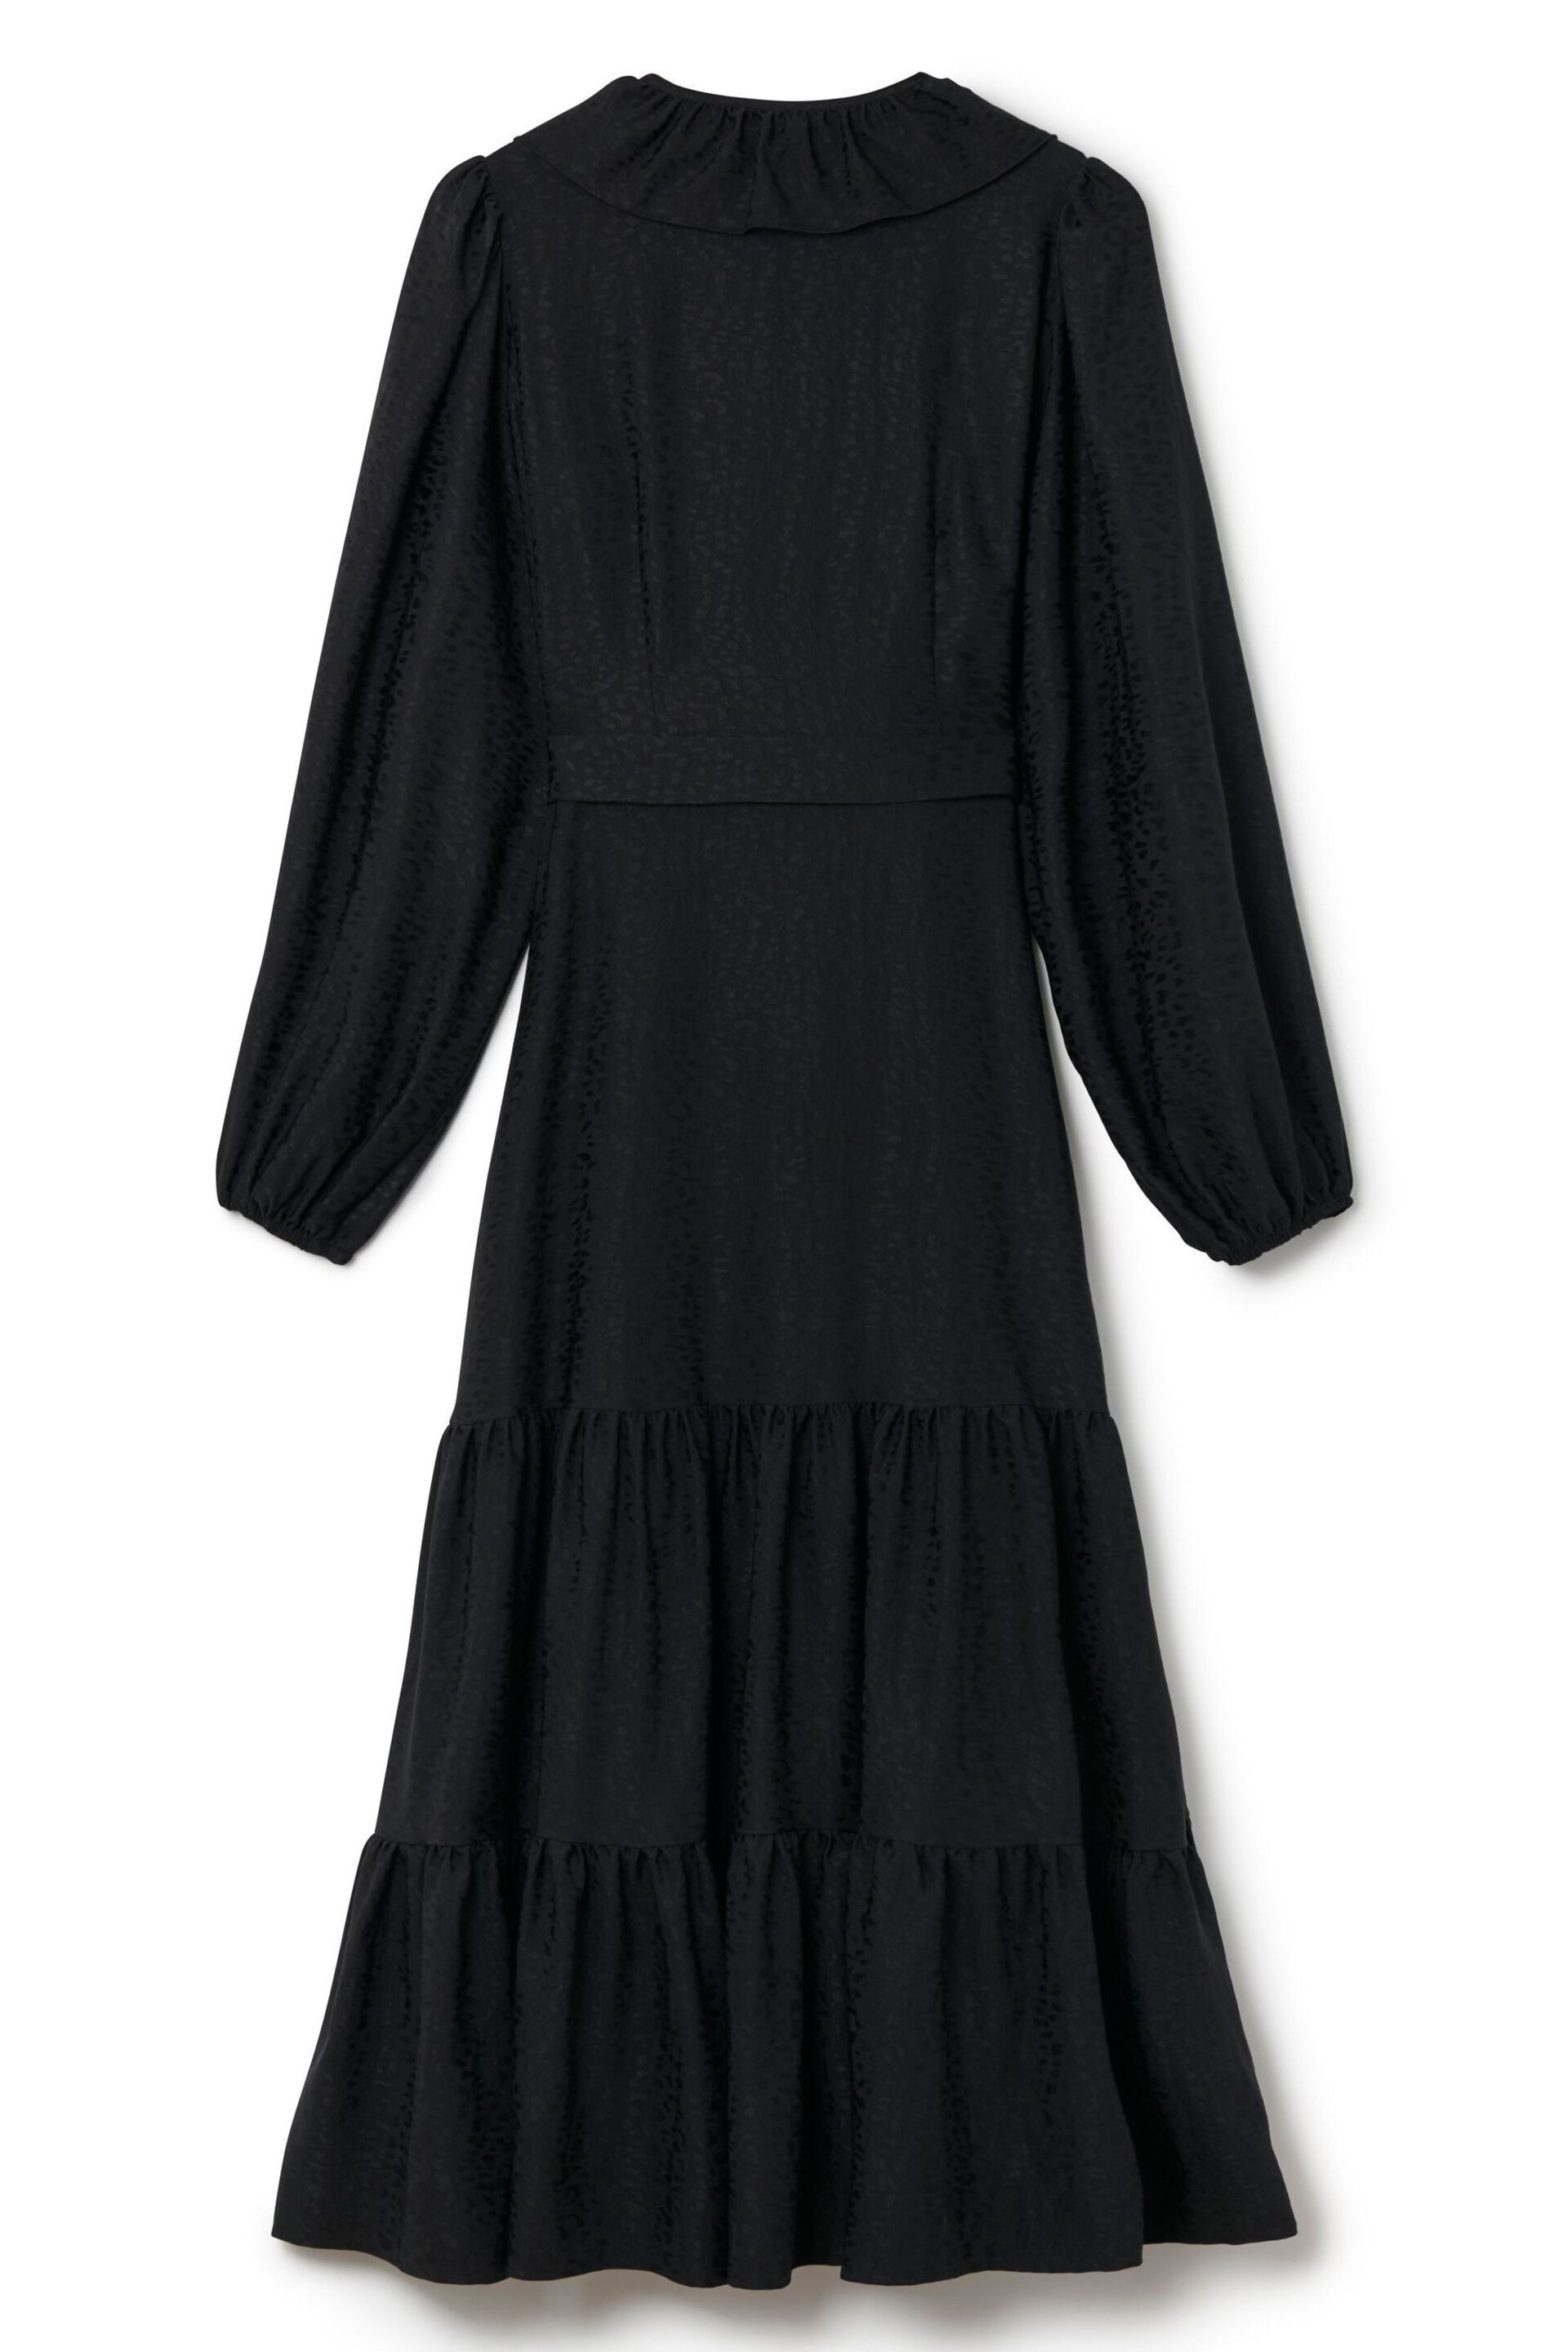 Another Sunday Wrap Over Midi Dress With Ruffle Detail - Image 10 of 11